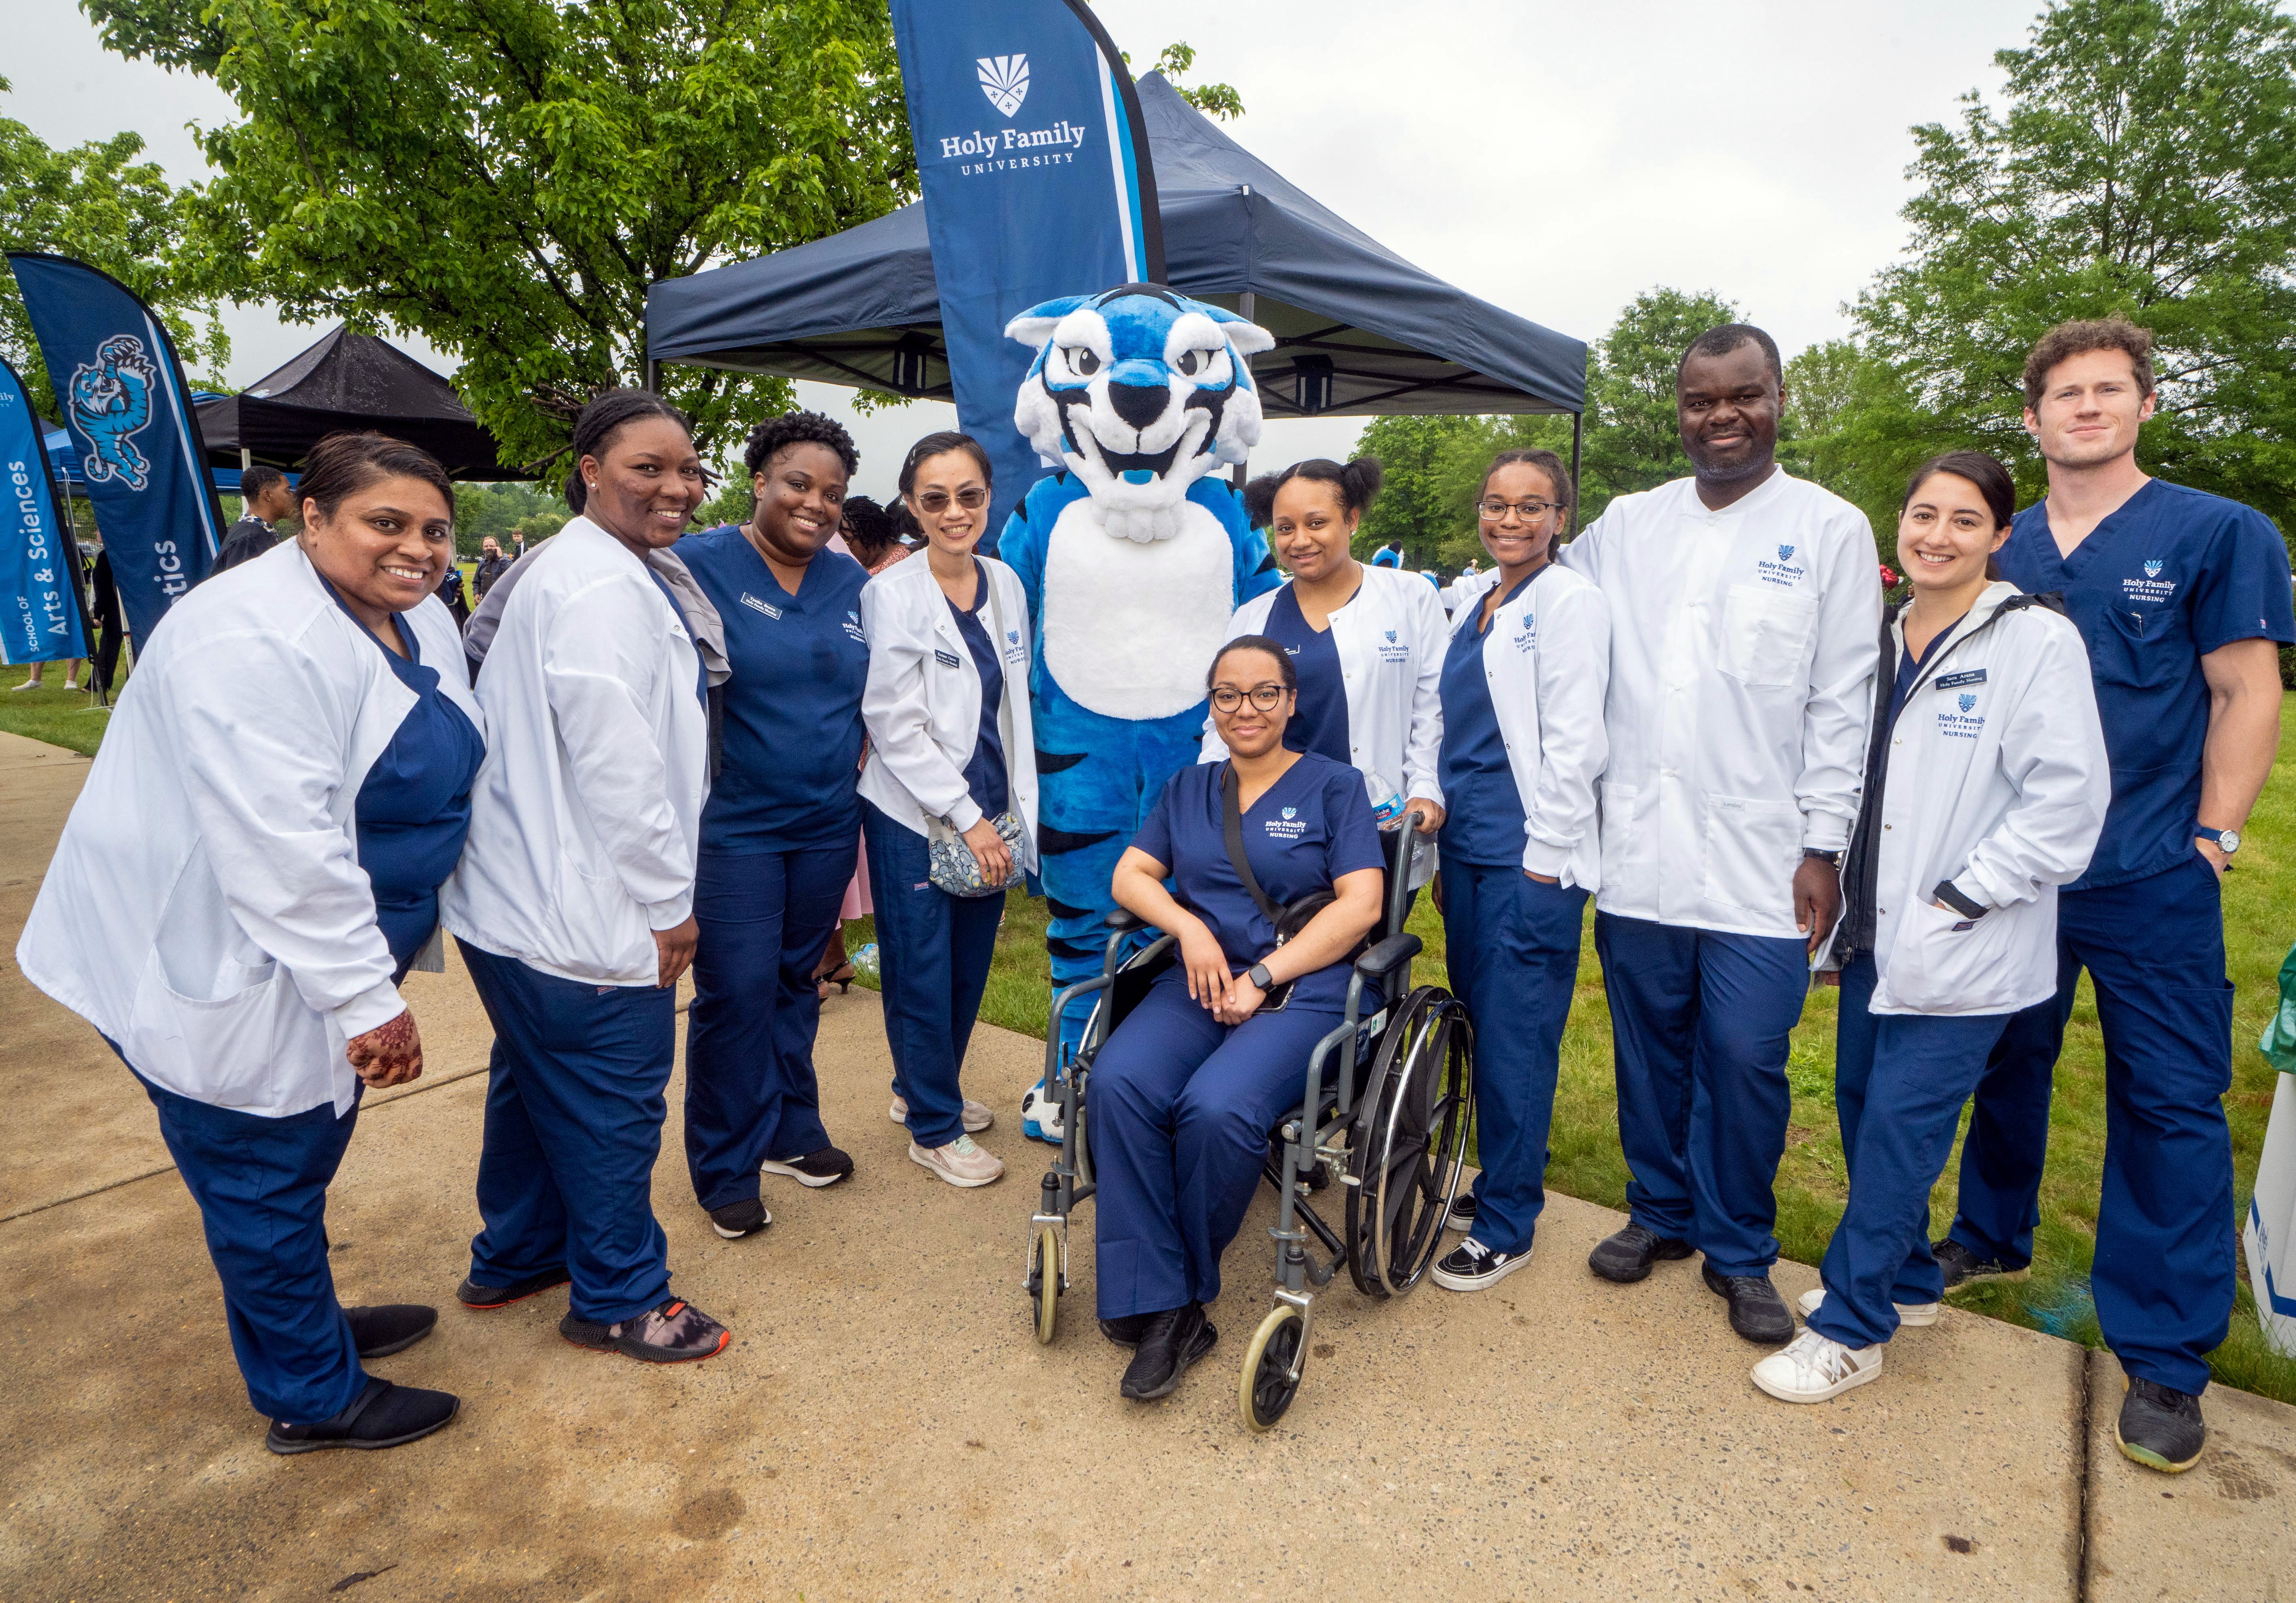 A group of Holy Family University nursing students pose for a photo with the university mascot